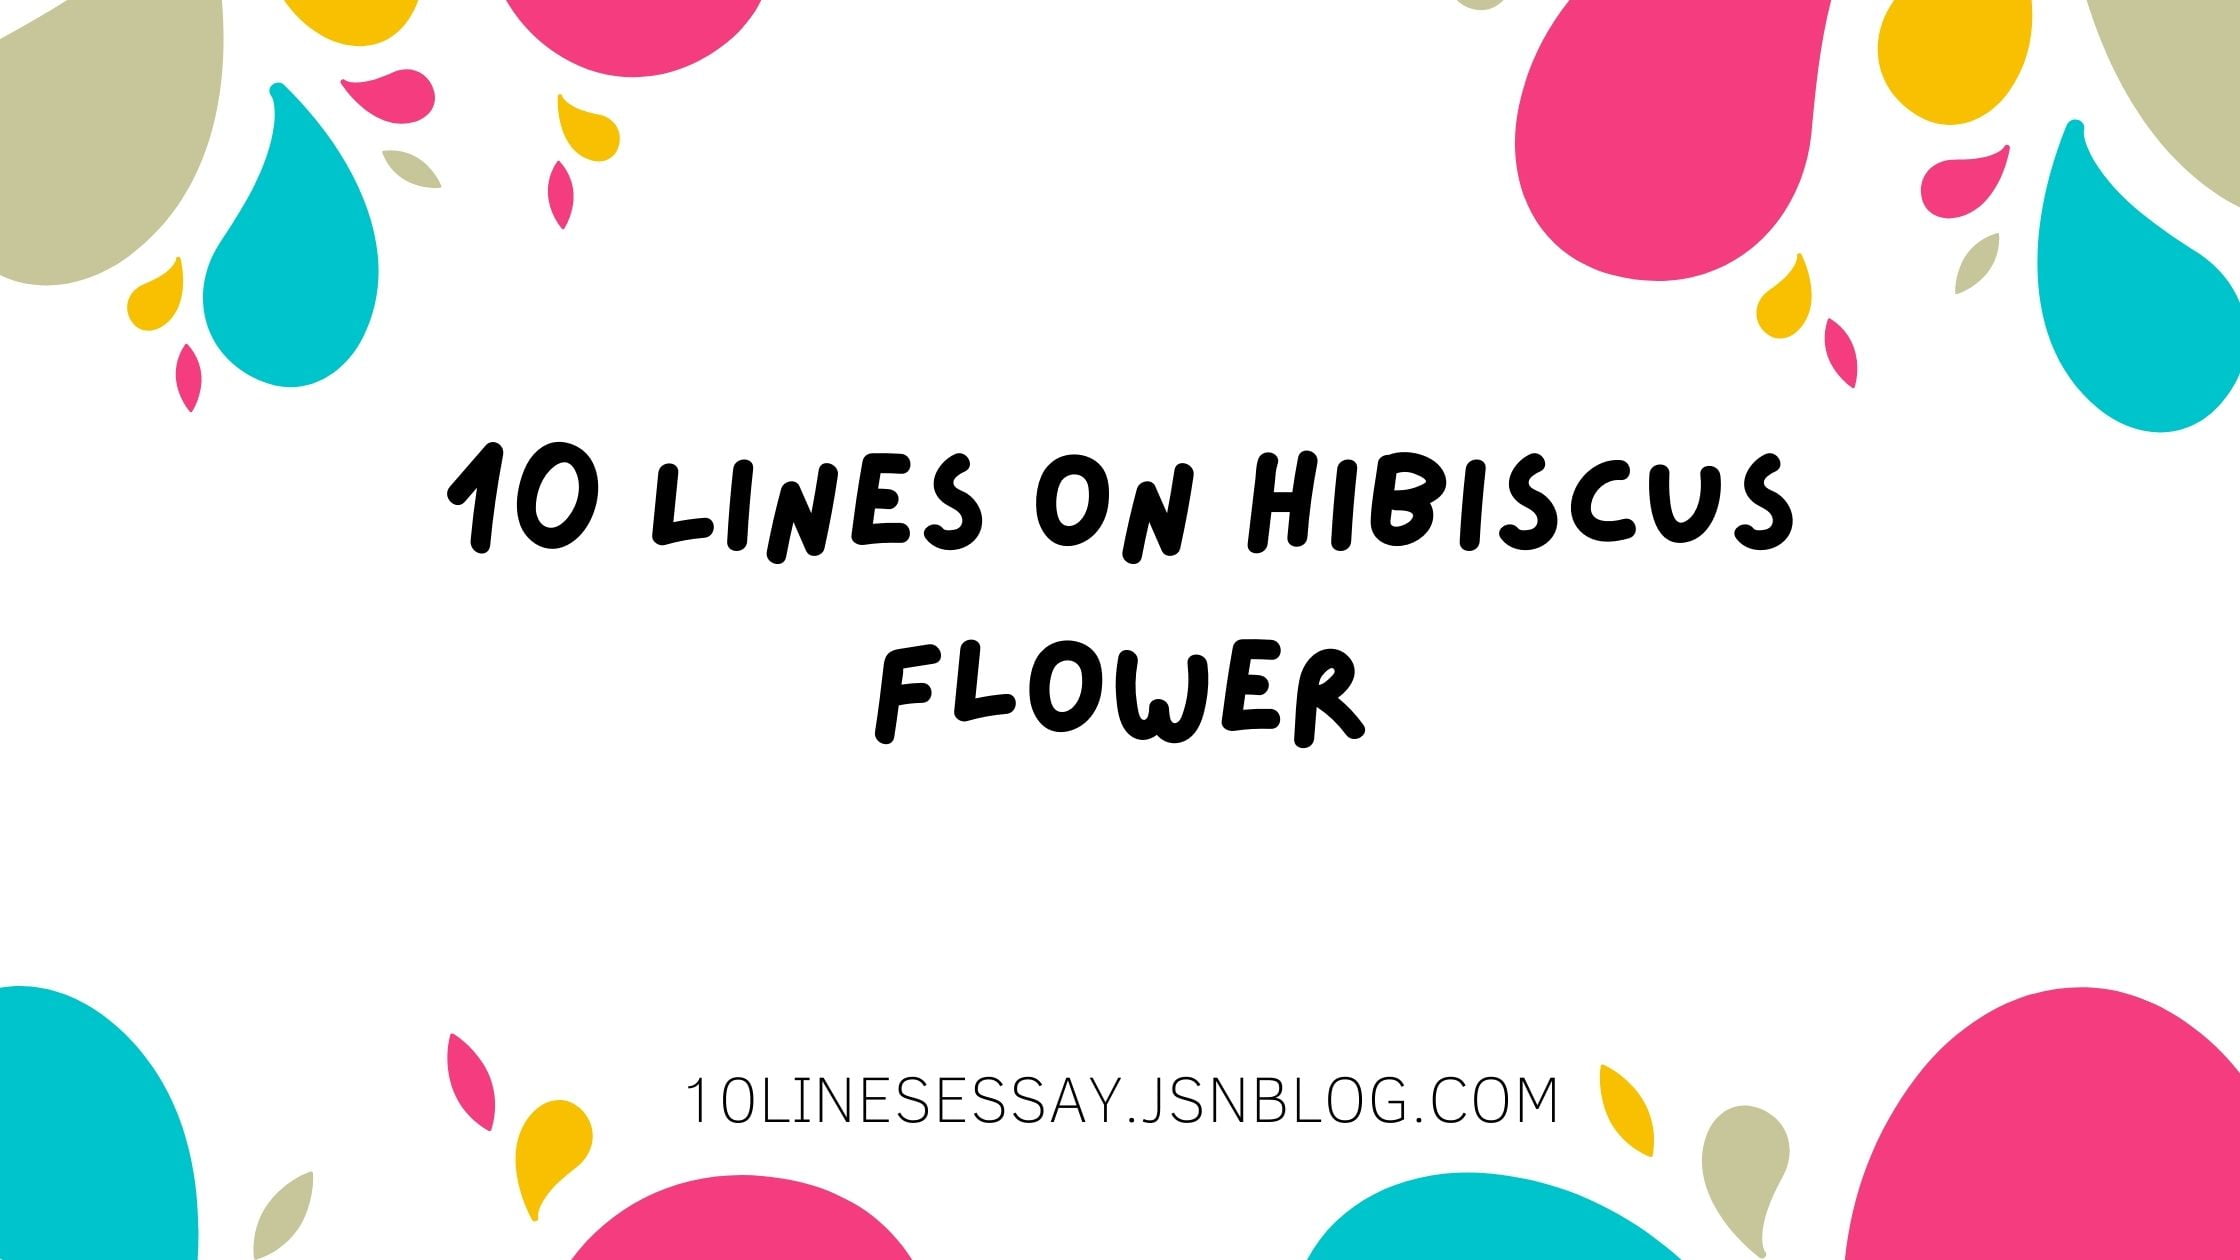 10 Lines On Hibiscus Flower In English